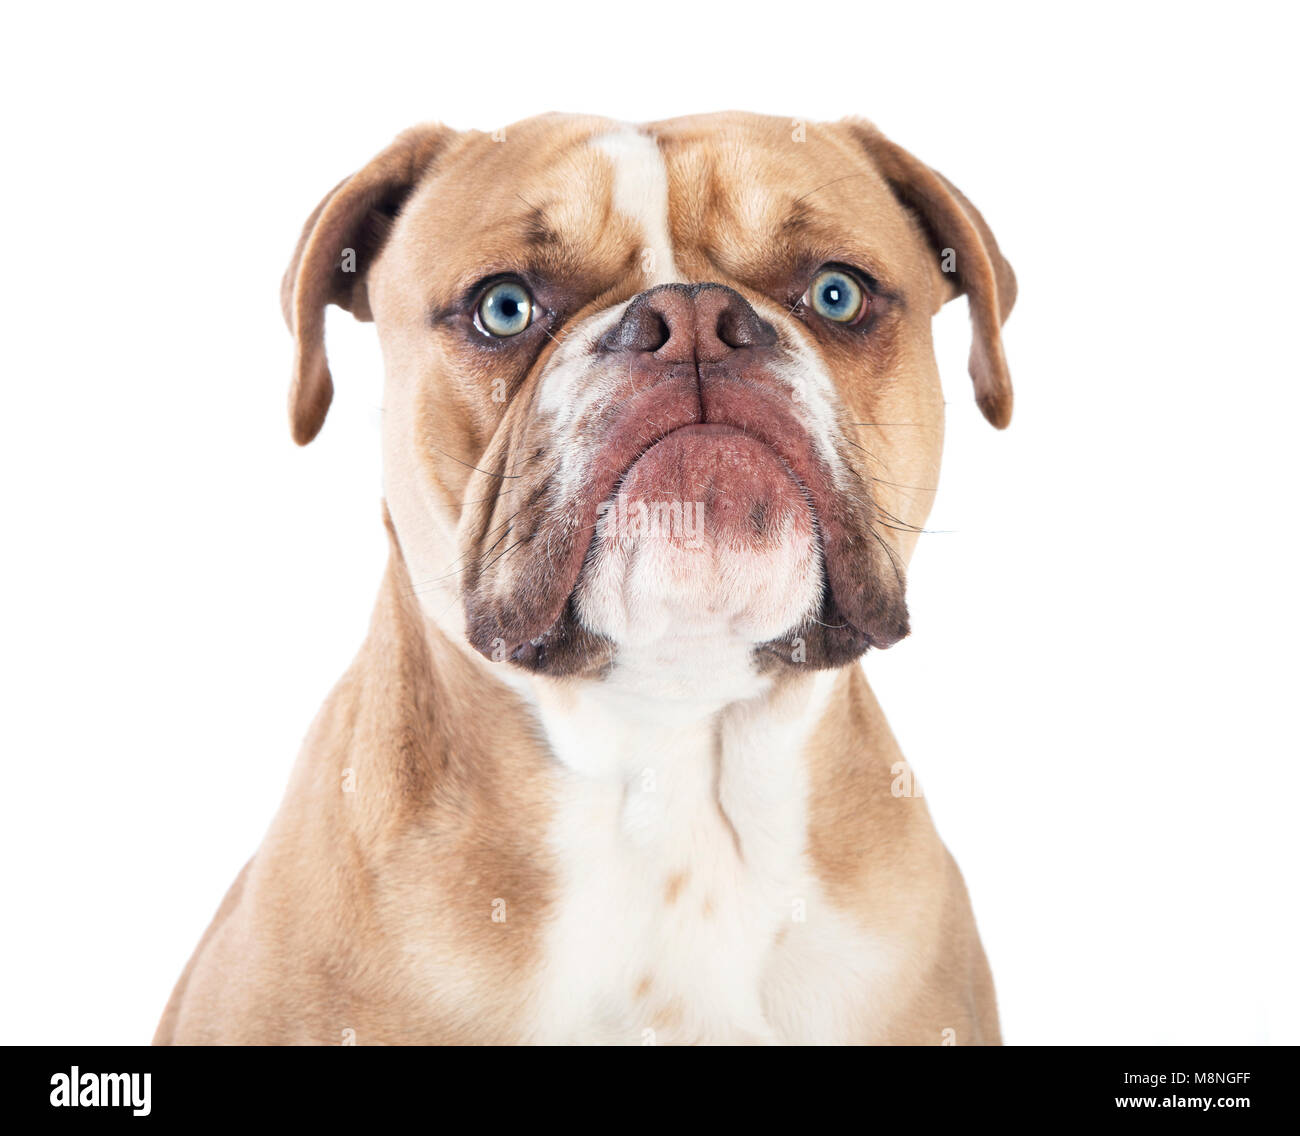 a young english bulldog from the front, white background Stock Photo